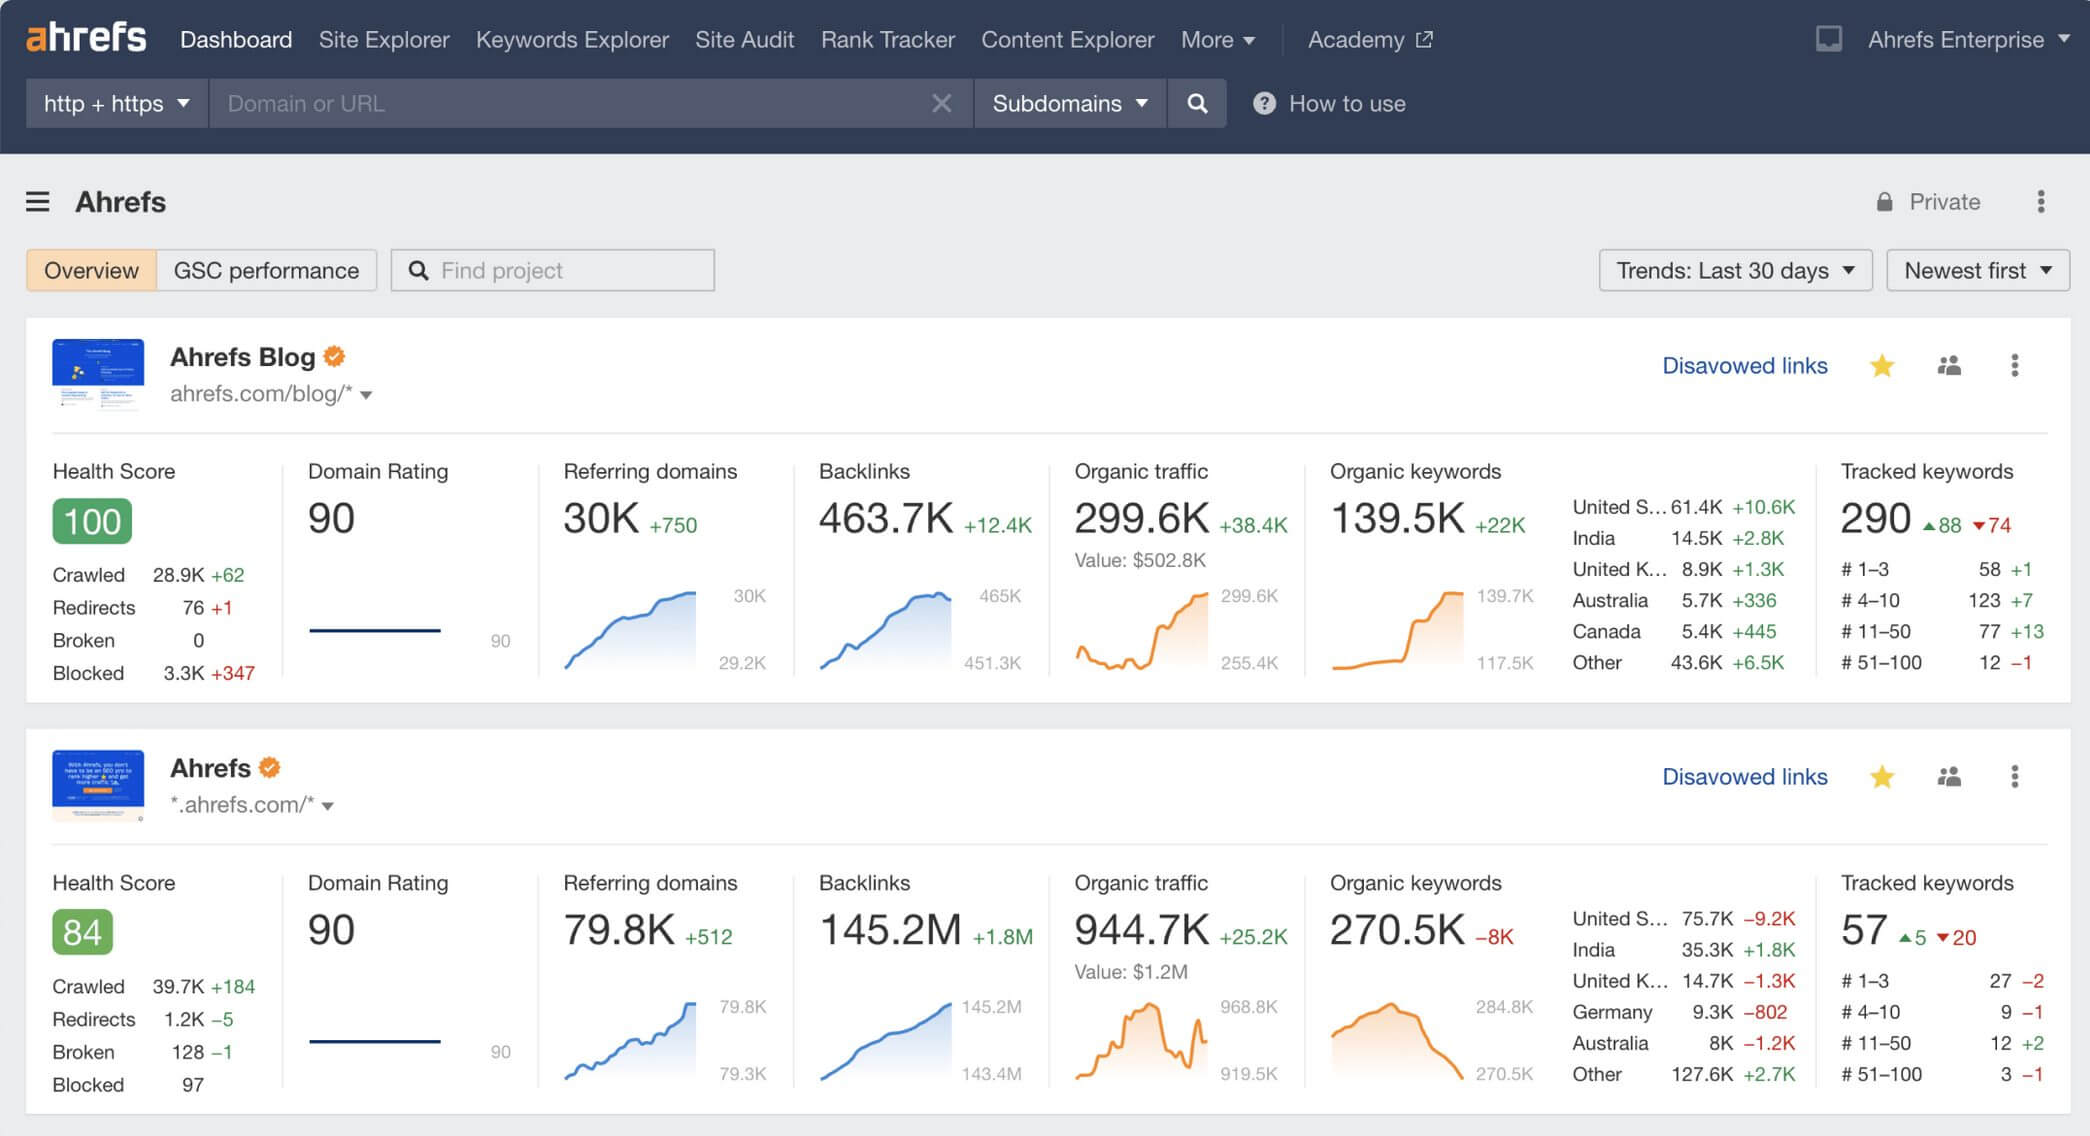 ahrefs Marketing Dashboard Examples For Performance Visualization